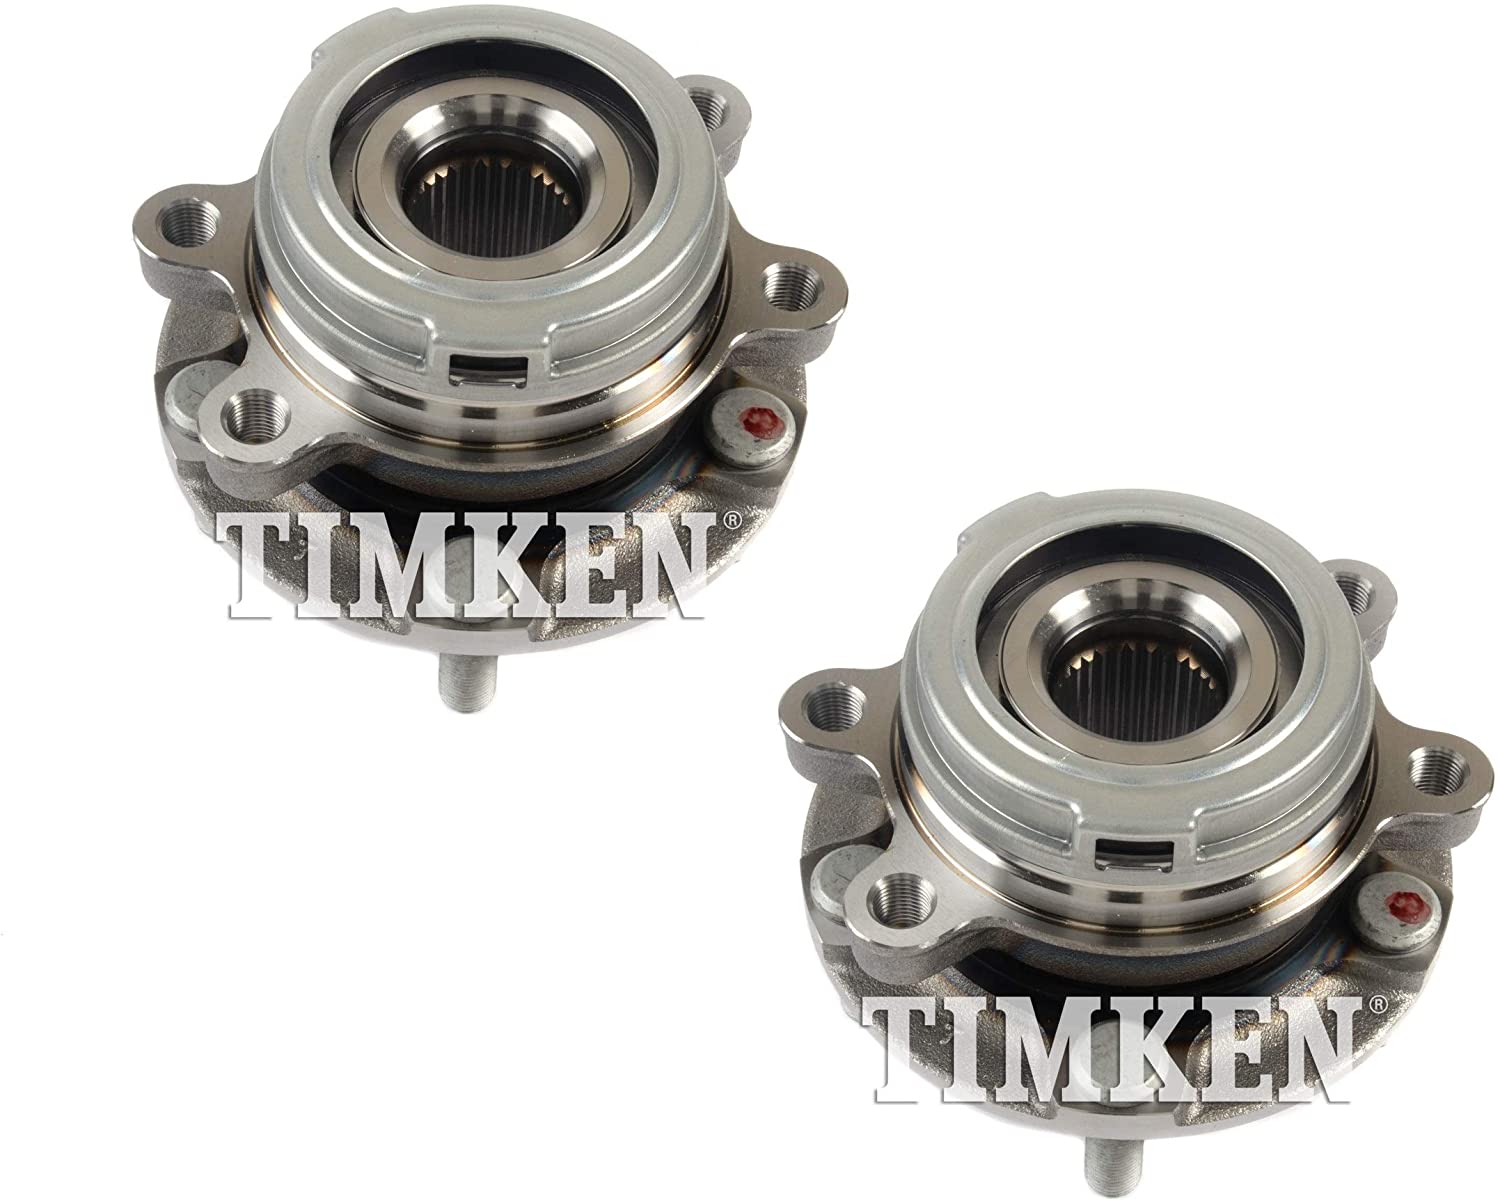 Pair Set 2 Front Timken Wheel Bearing Hub Assies Kit for Nissan Quest Murano FWD